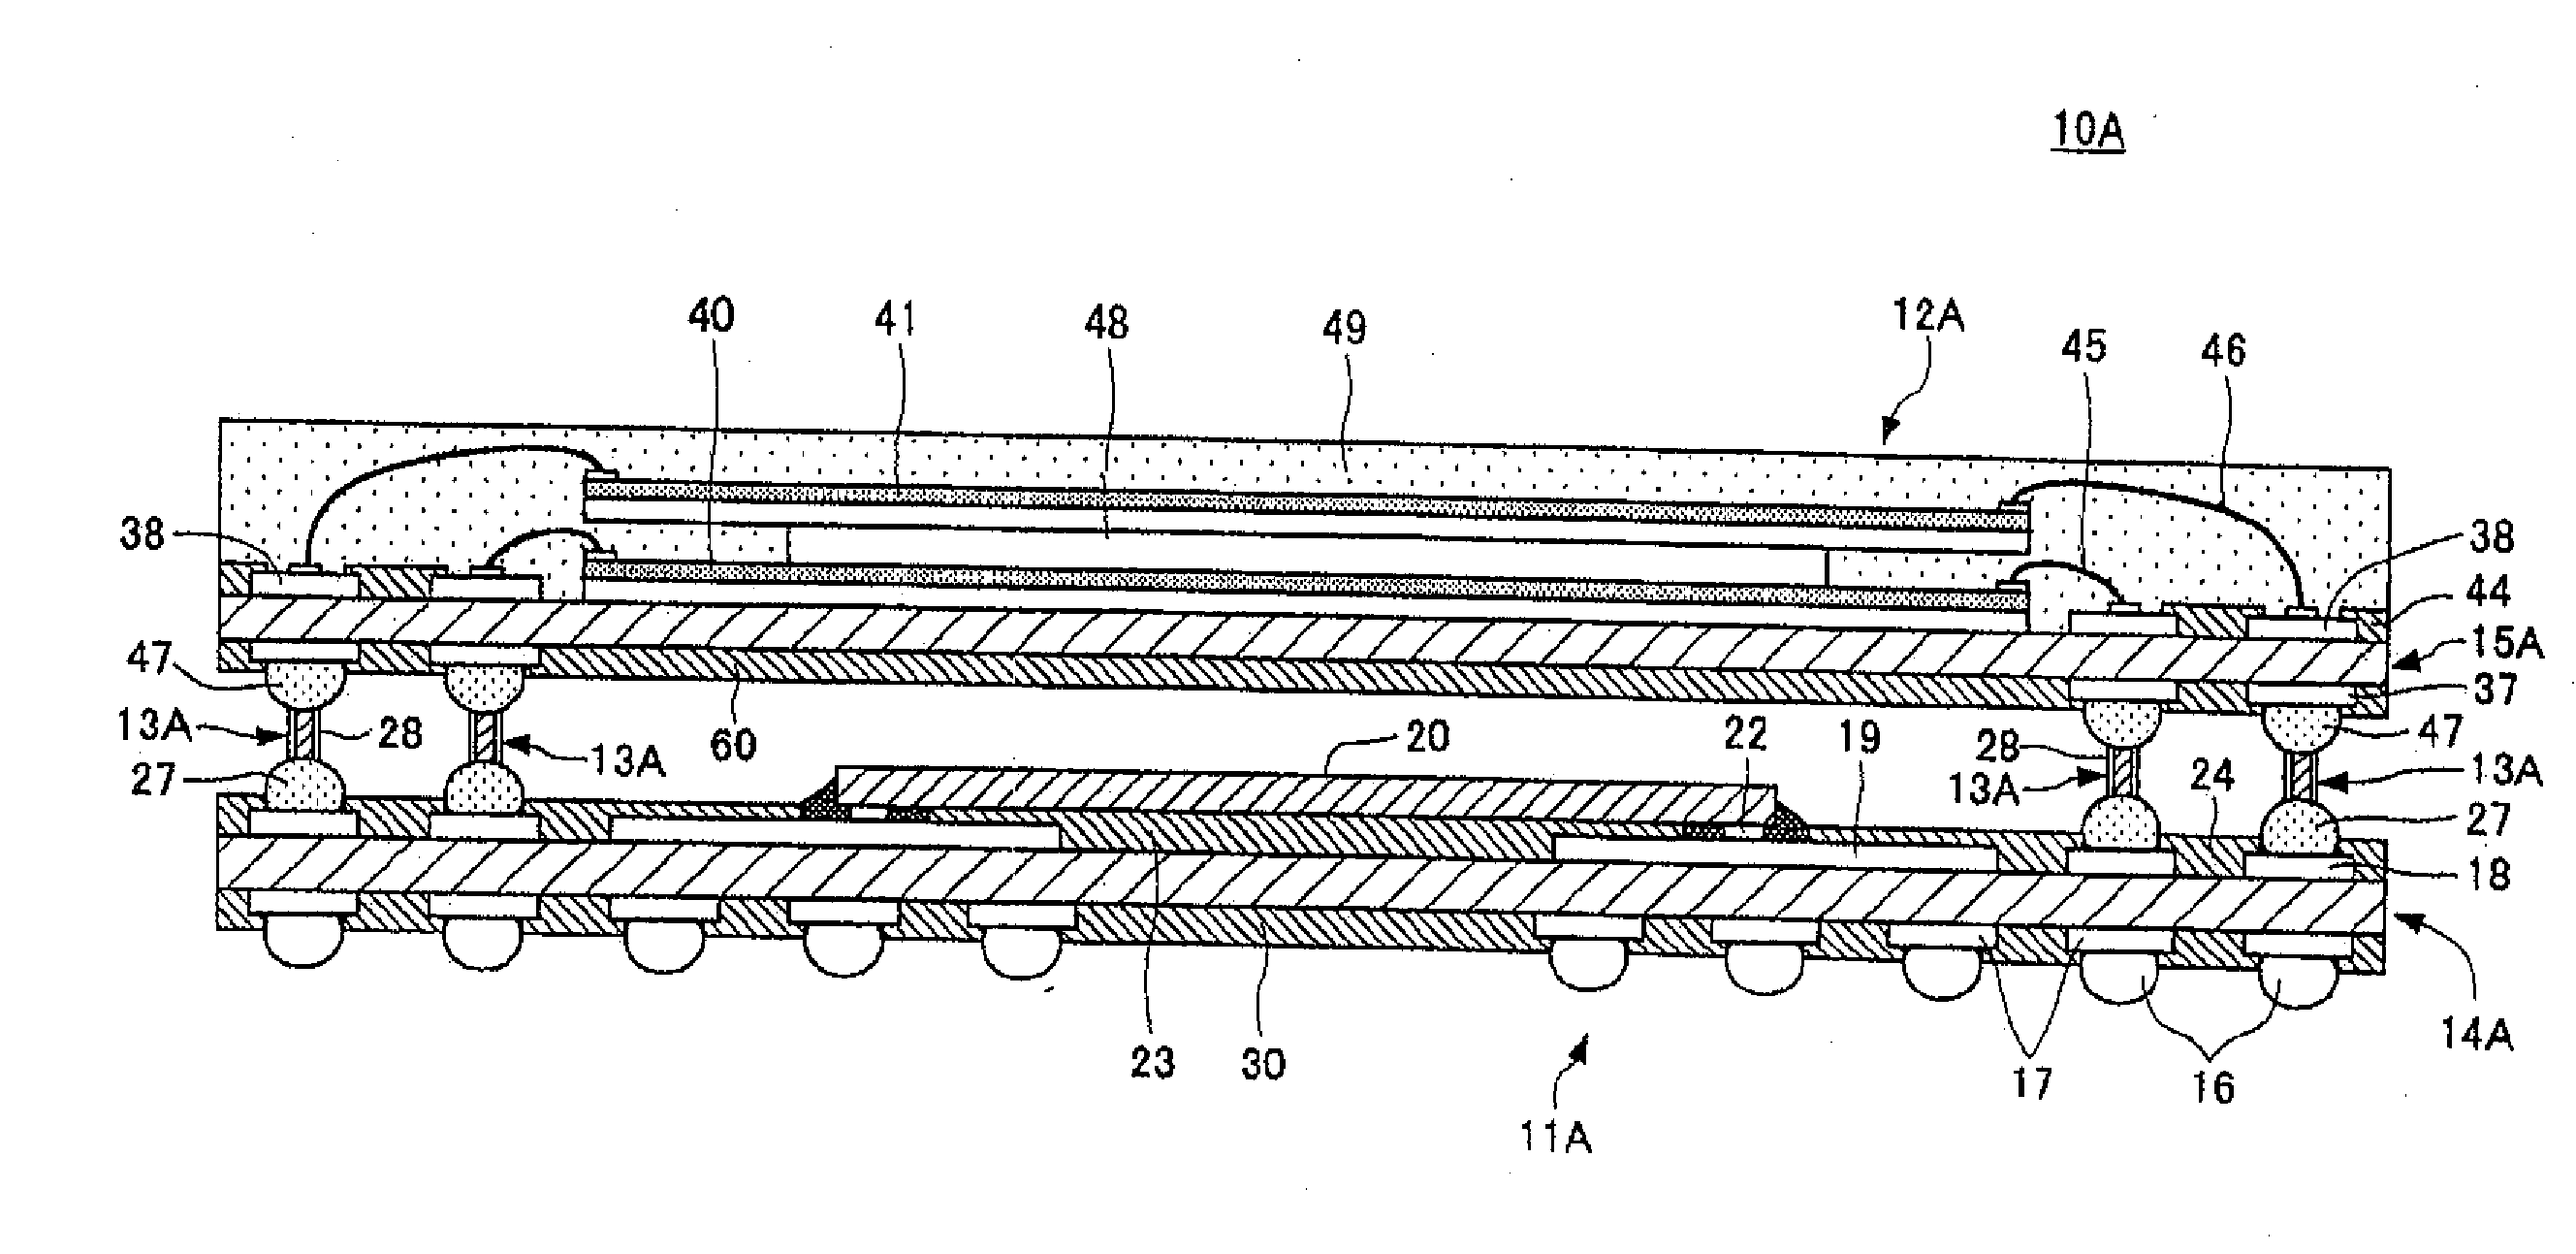 Stacked package and method for manufacturing the package